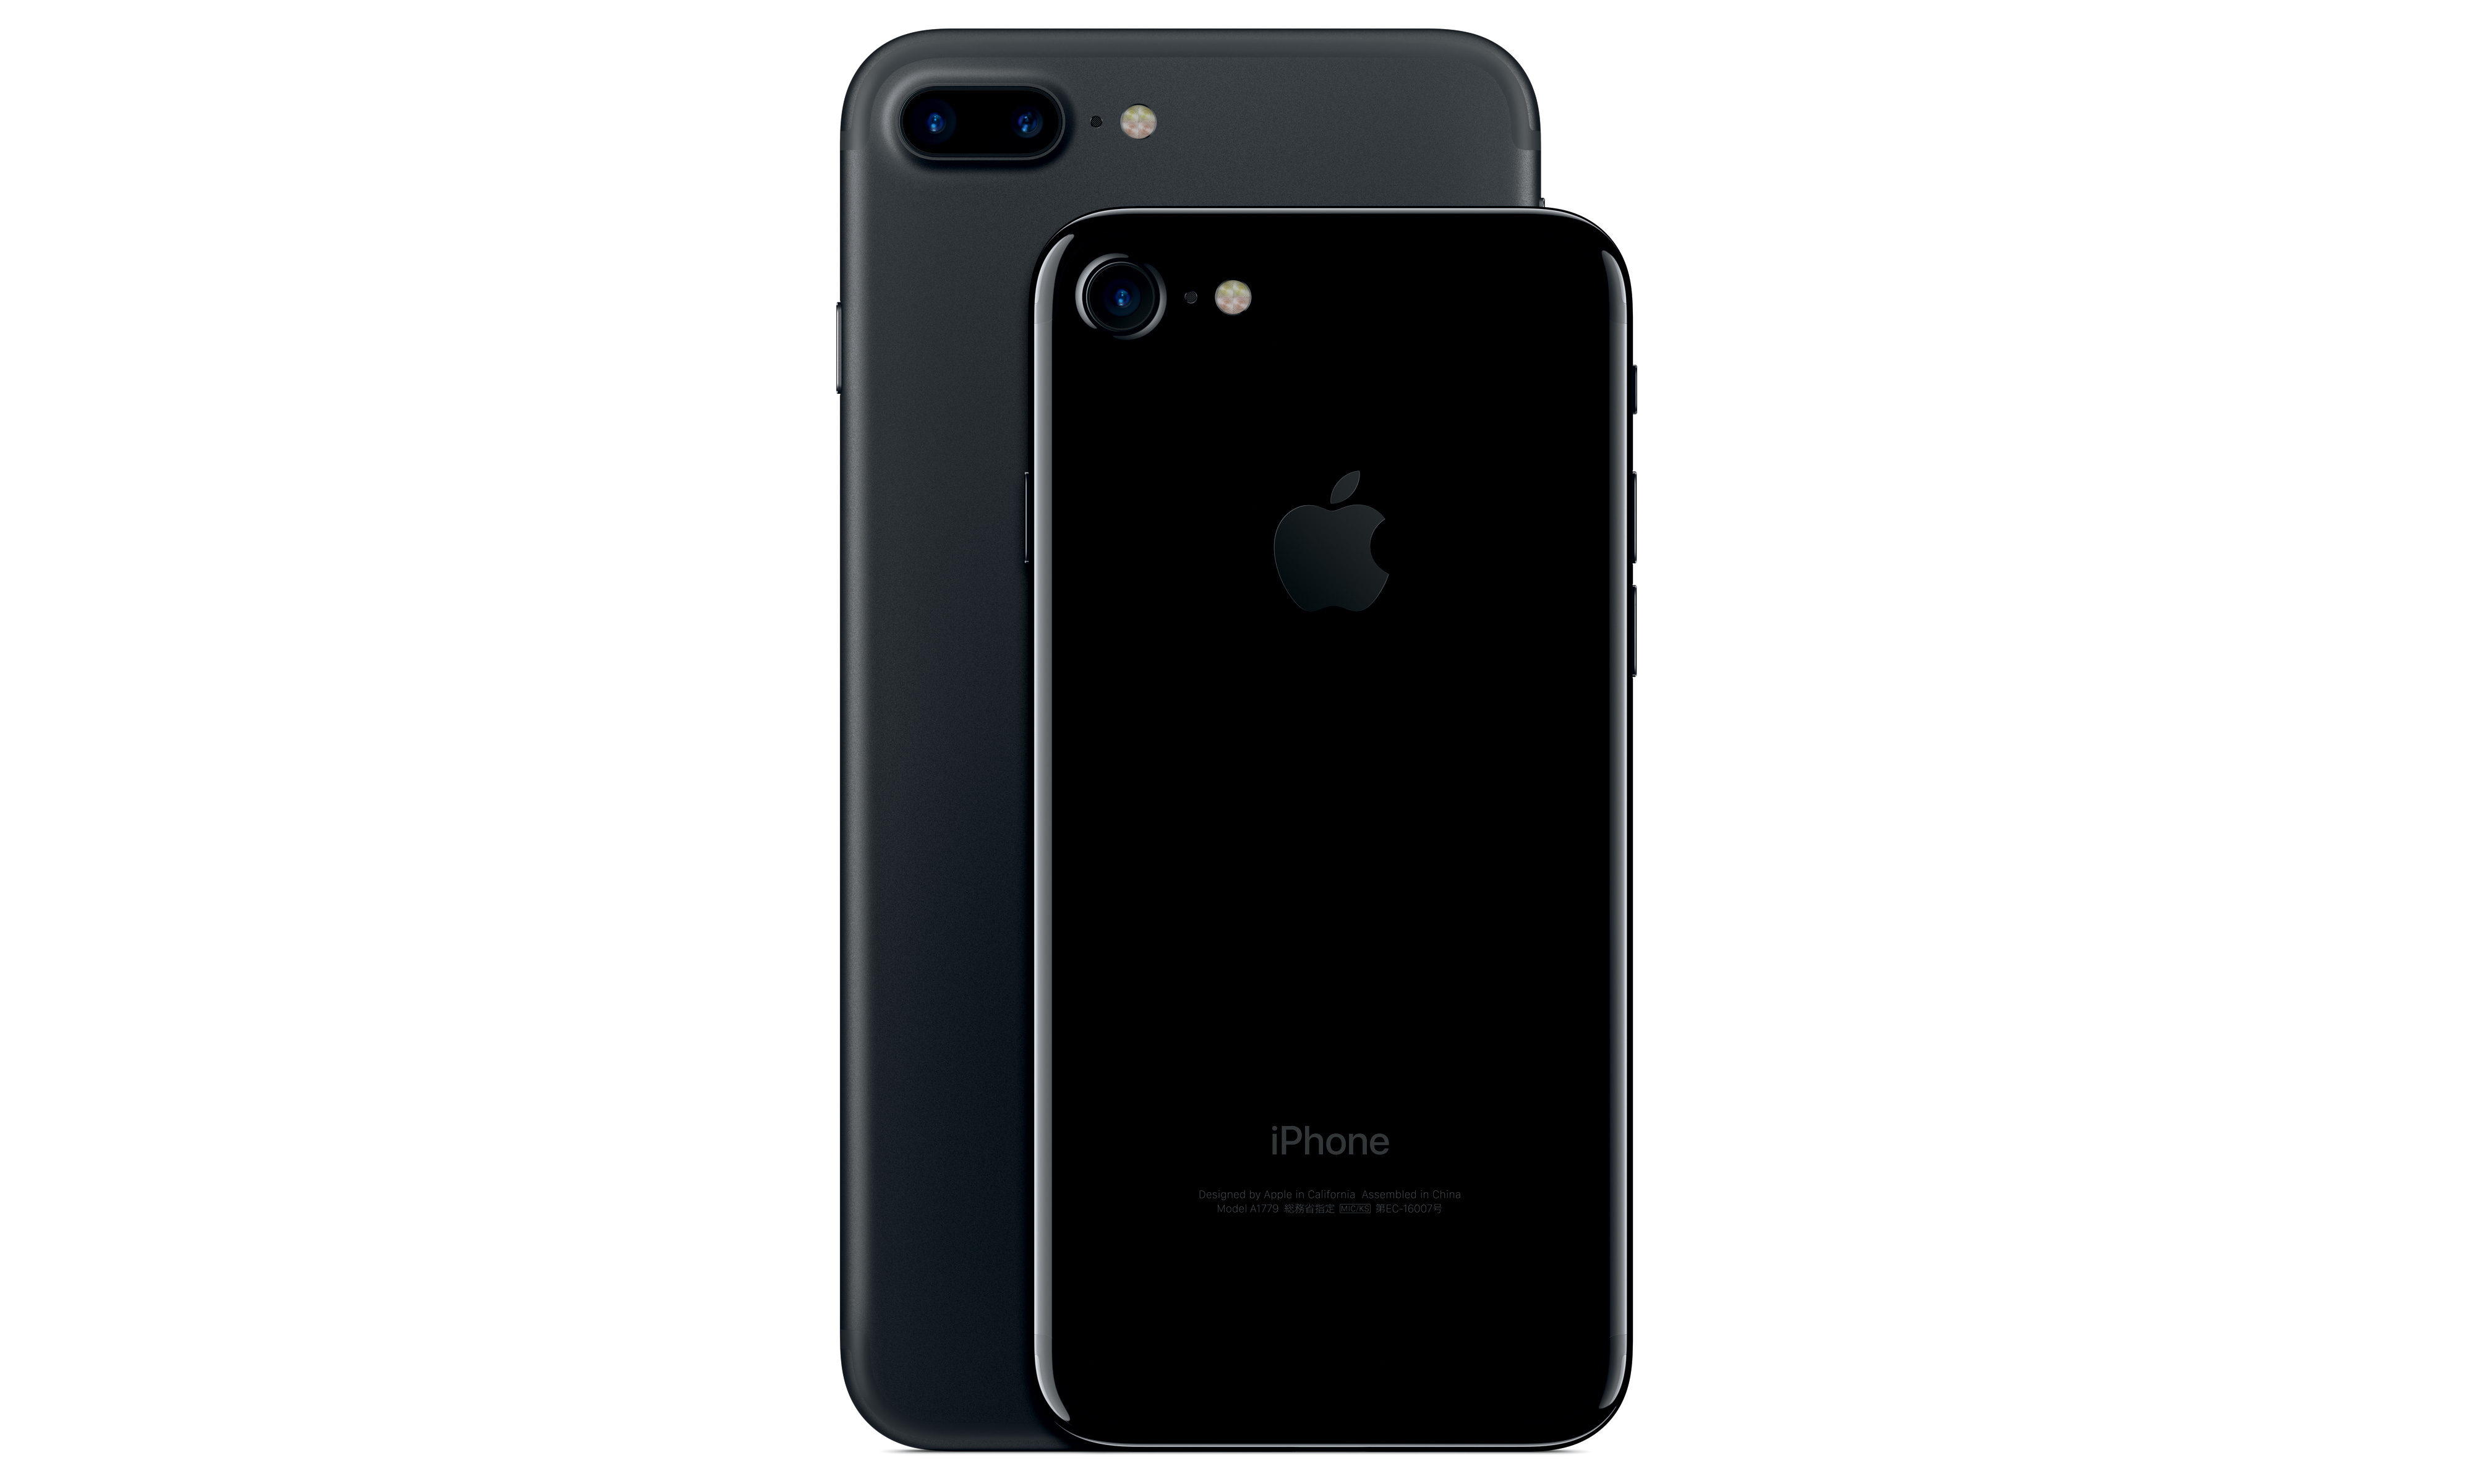 iPhone 7 & iPhone 7 Plus: A10 Fusion New Camera, Wide Color Gamut, Preorders Start Sept. 9th